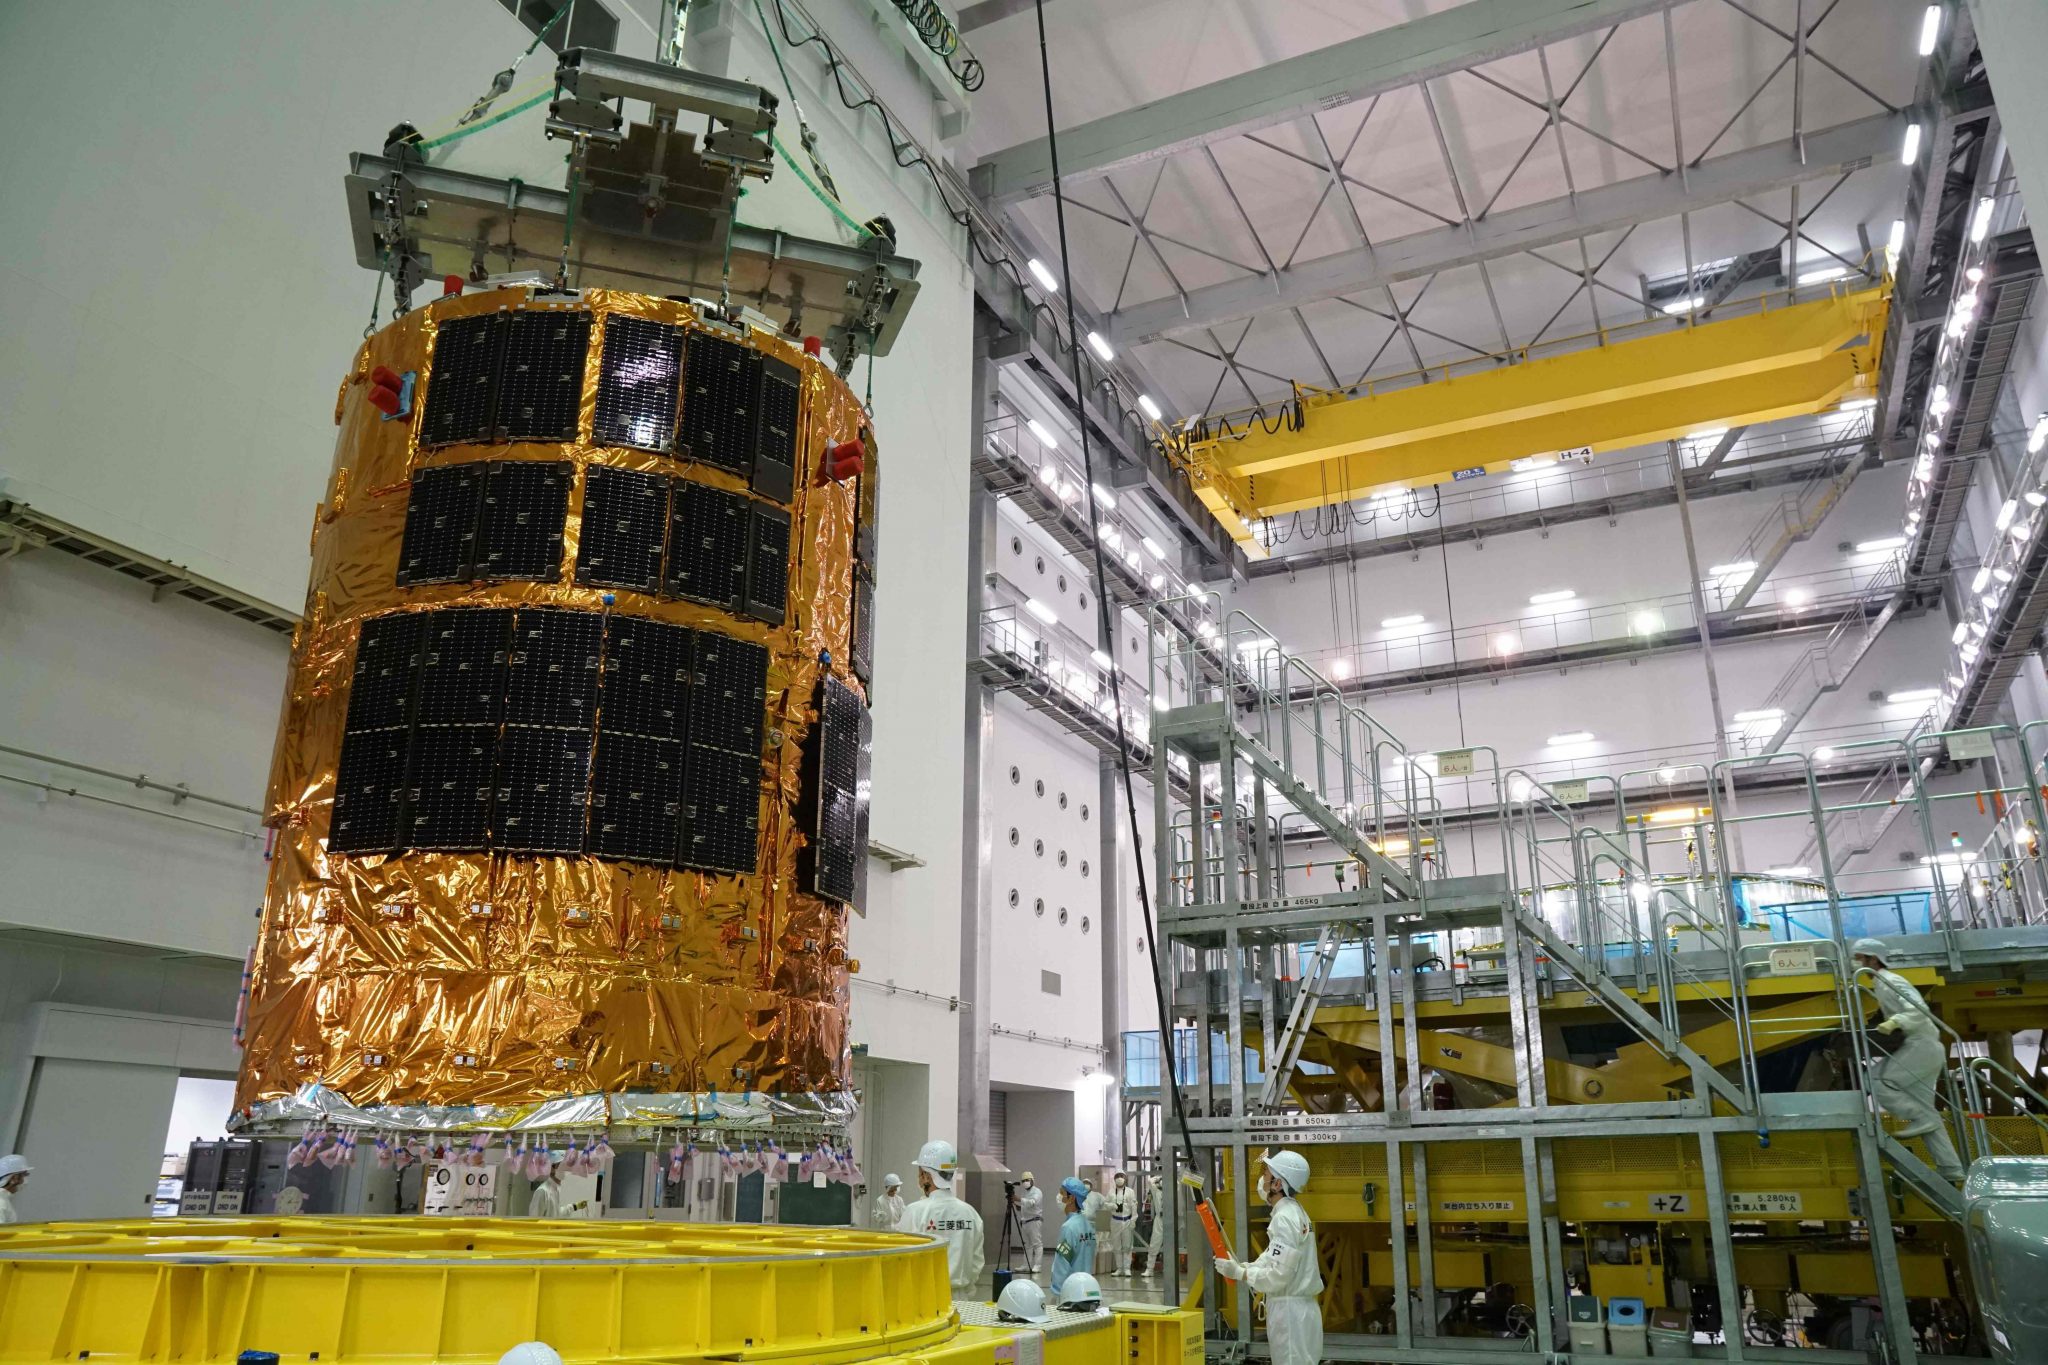 (FILES) This file handout from the Japan Aerospace Exploration Agency (JAXA) taken on July 6, 2016 shows the HTV6, an unmanned cargo spacecraft, "Kounotori", or "stork" in Japanese, being assembled at the Tanegashima Space Center in Tanegashima island, Kagoshima prefecture.  An experimental Japanese mission to clear 'space junk' or rubbish from the Earth's orbit has ended in failure, officials said on February 6, 2017, in an embarassment for Tokyo. / AFP PHOTO / JAXA / STR / RESTRICTED TO EDITORIAL USE - MANDATORY CREDIT "AFP PHOTO / JAXA" - NO MARKETING NO ADVERTISING CAMPAIGNS - DISTRIBUTED AS A SERVICE TO CLIENTS